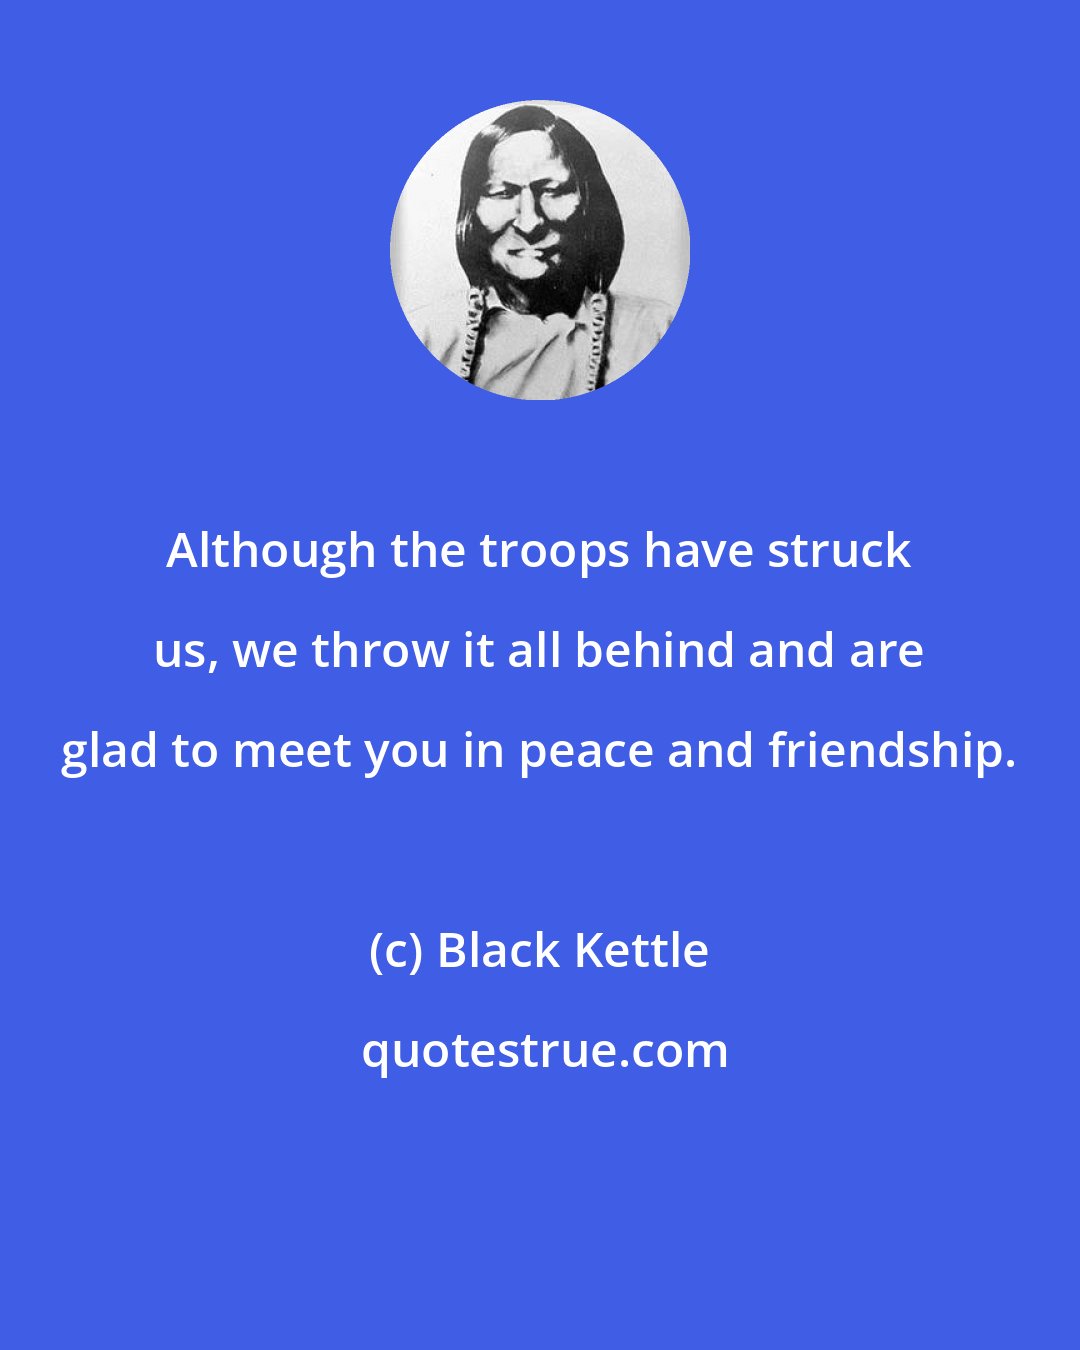 Black Kettle: Although the troops have struck us, we throw it all behind and are glad to meet you in peace and friendship.